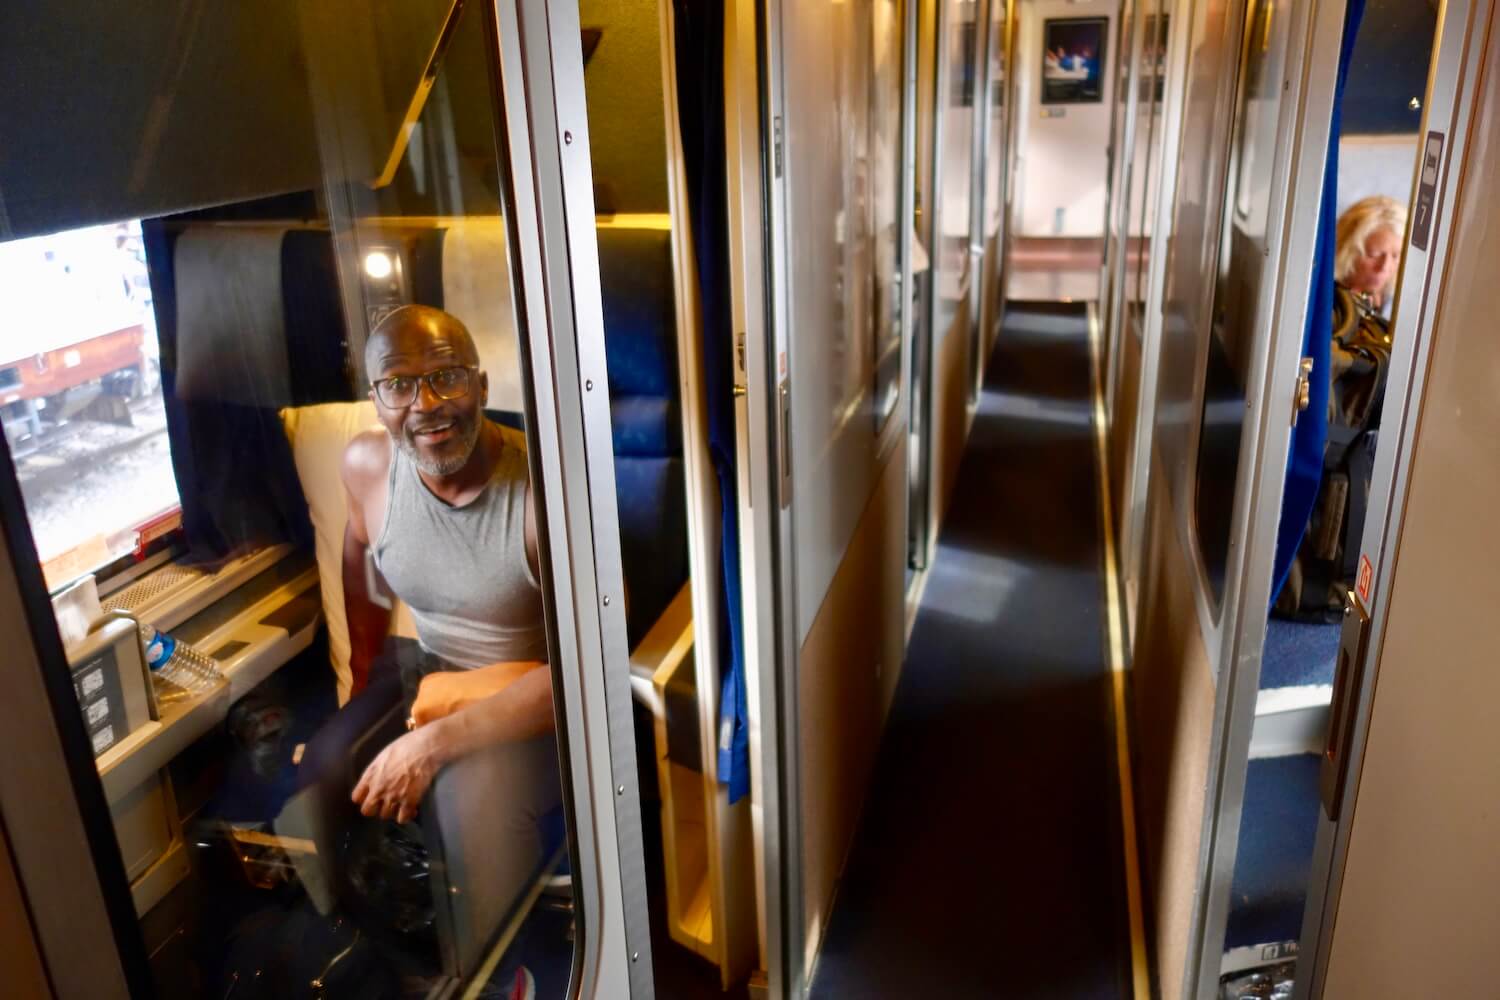 A black man sitting in a roomette compartment on an Amtrak train gets comfortable and looks at the camera, which is in the hallway between the two sides of rooms.  